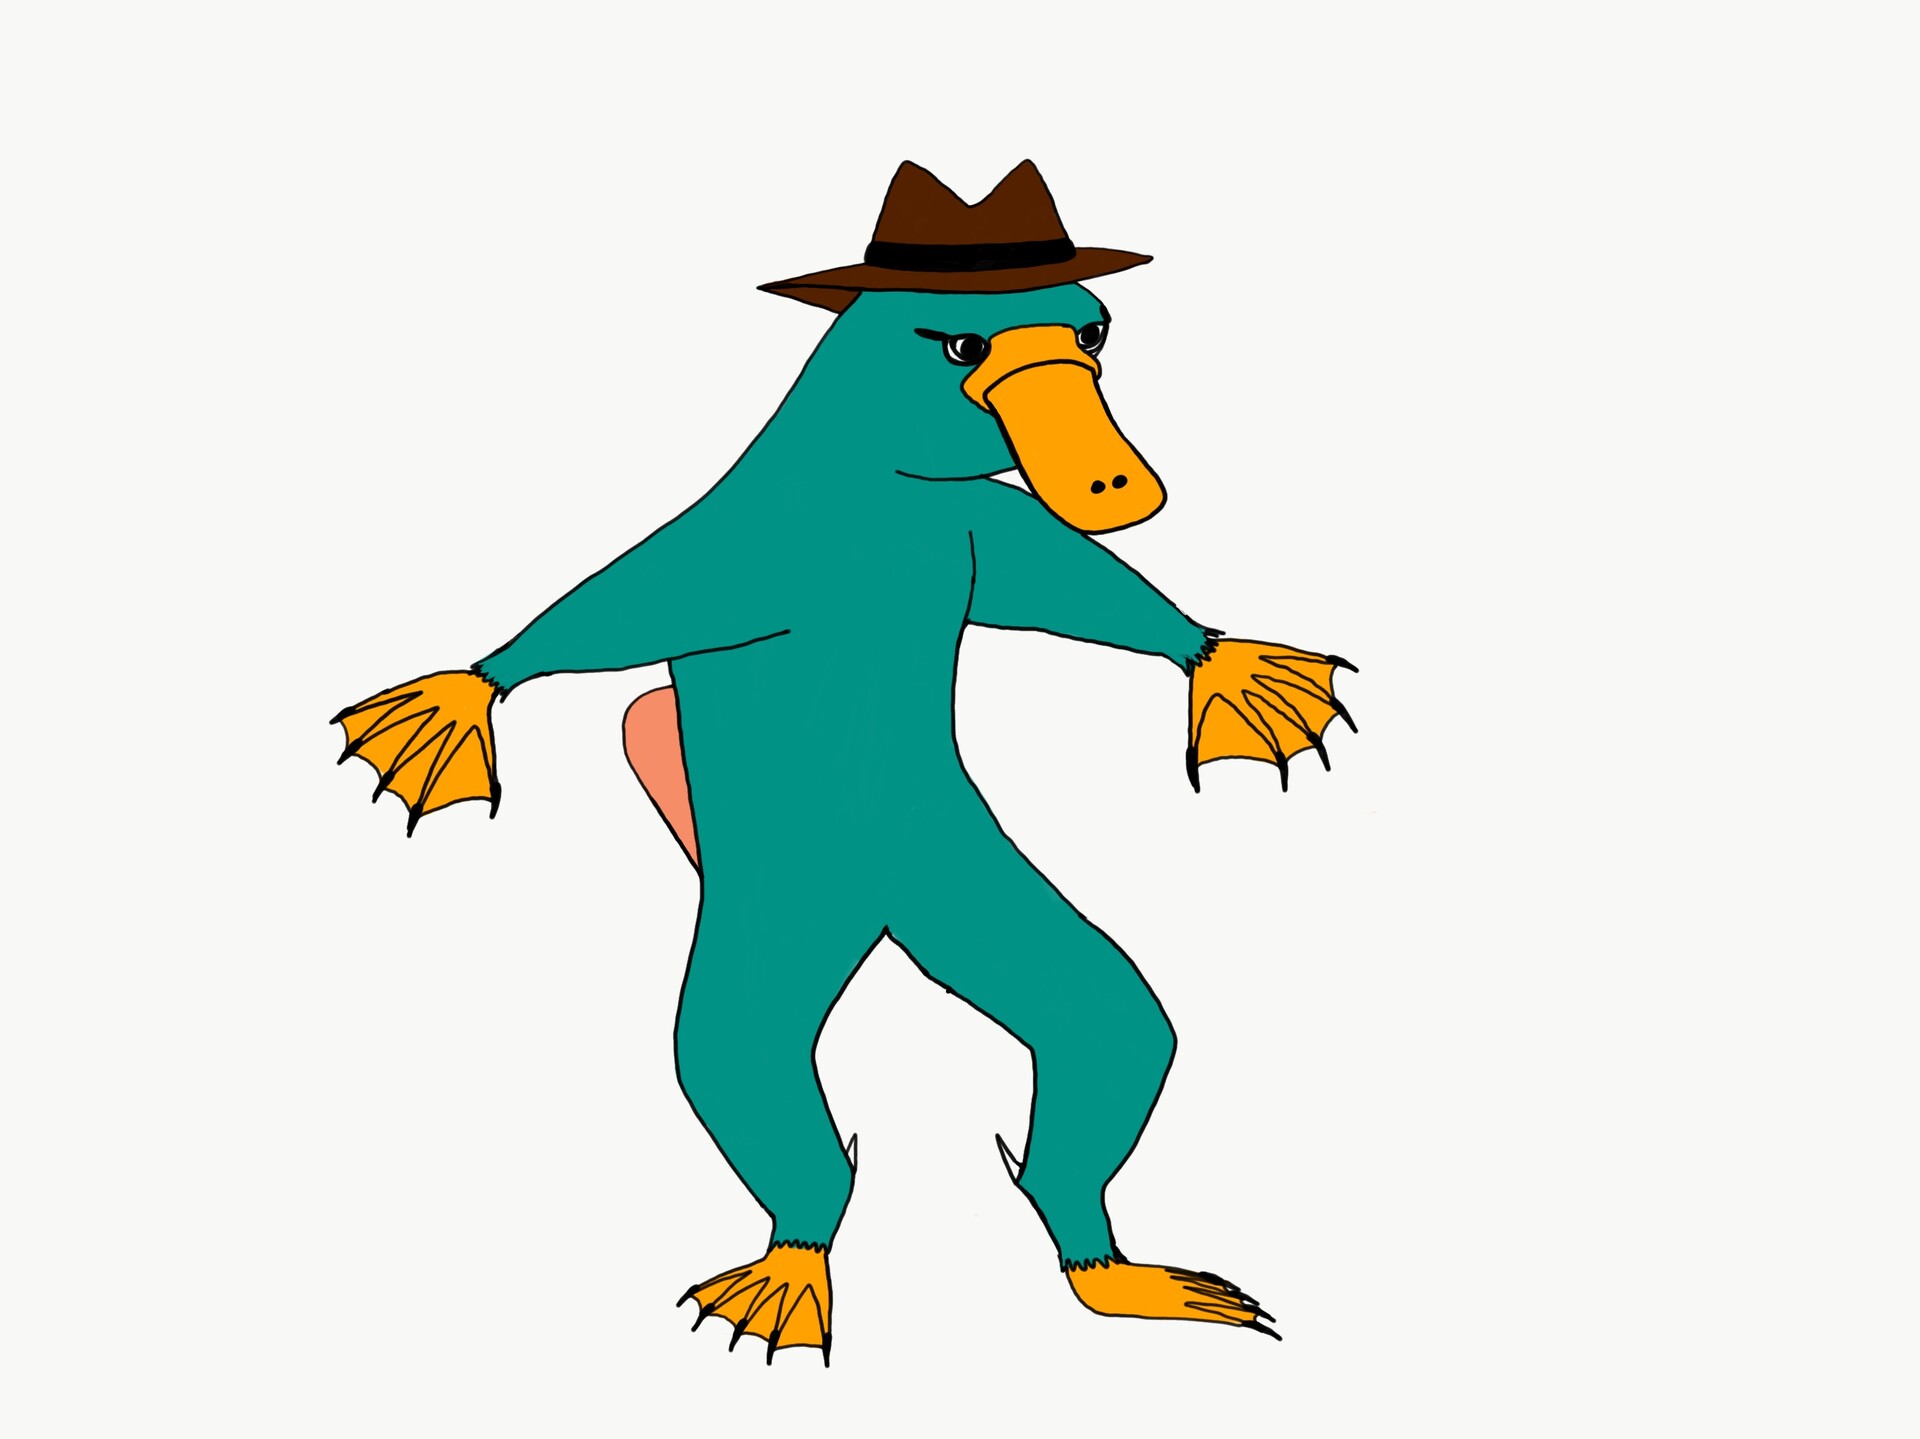 HD wallpaper: Perry the Platypus, Agent P., Phineas and Ferb, cartoon,  green color